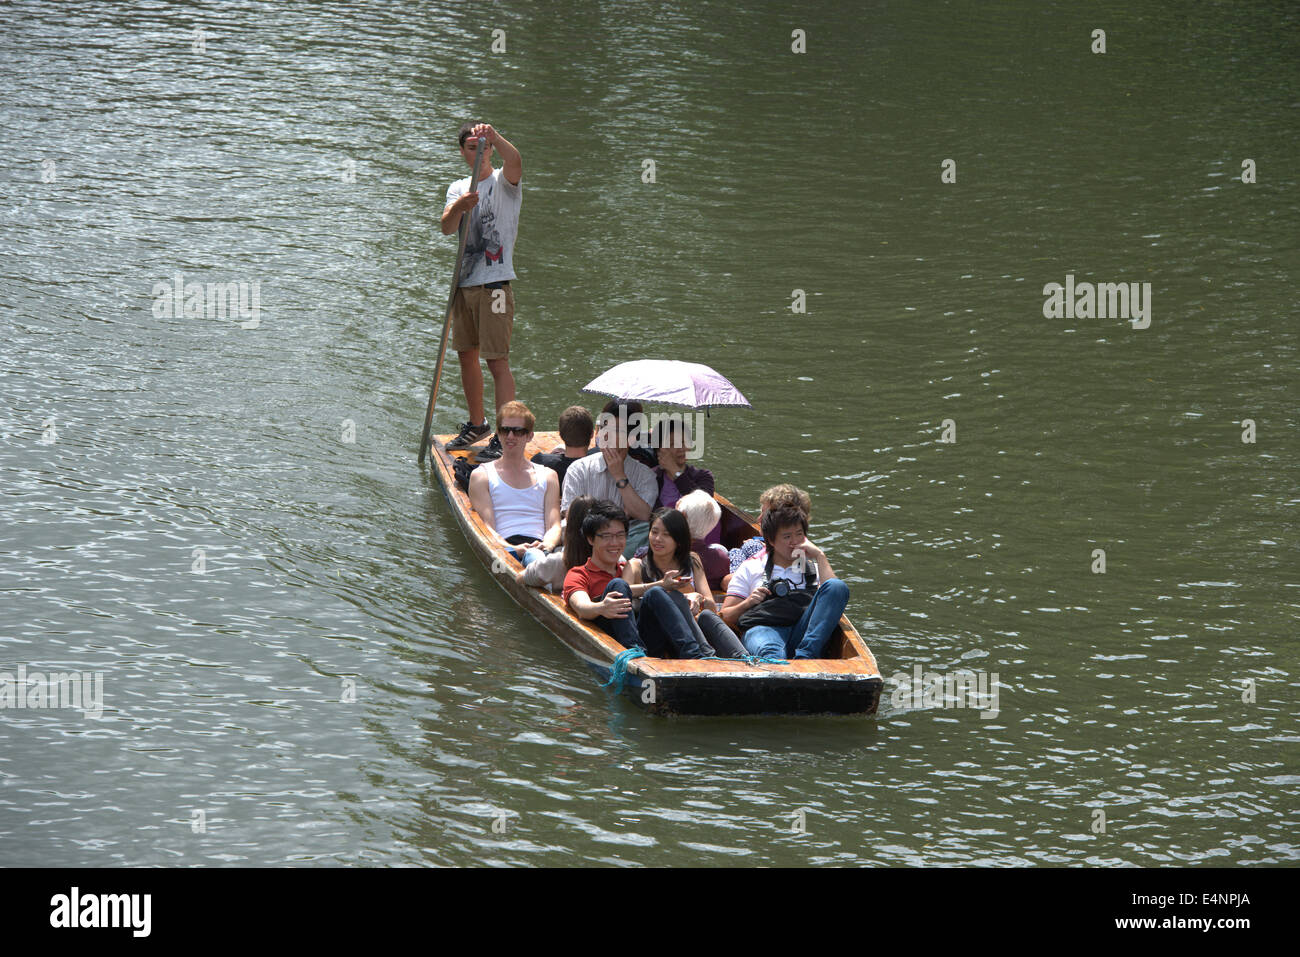 Cambridge, UK. 15th July,  2014. Tourists enjoy punting on the River Cam in a alternating sunshine and clouds. Temperatures are set to rise to the hottest of the year in the South East over the next 48 hours. The superstitious believe that if it rains today it will rain for the next 40 days. Credit Julian Eales/Alamy Live News Stock Photo